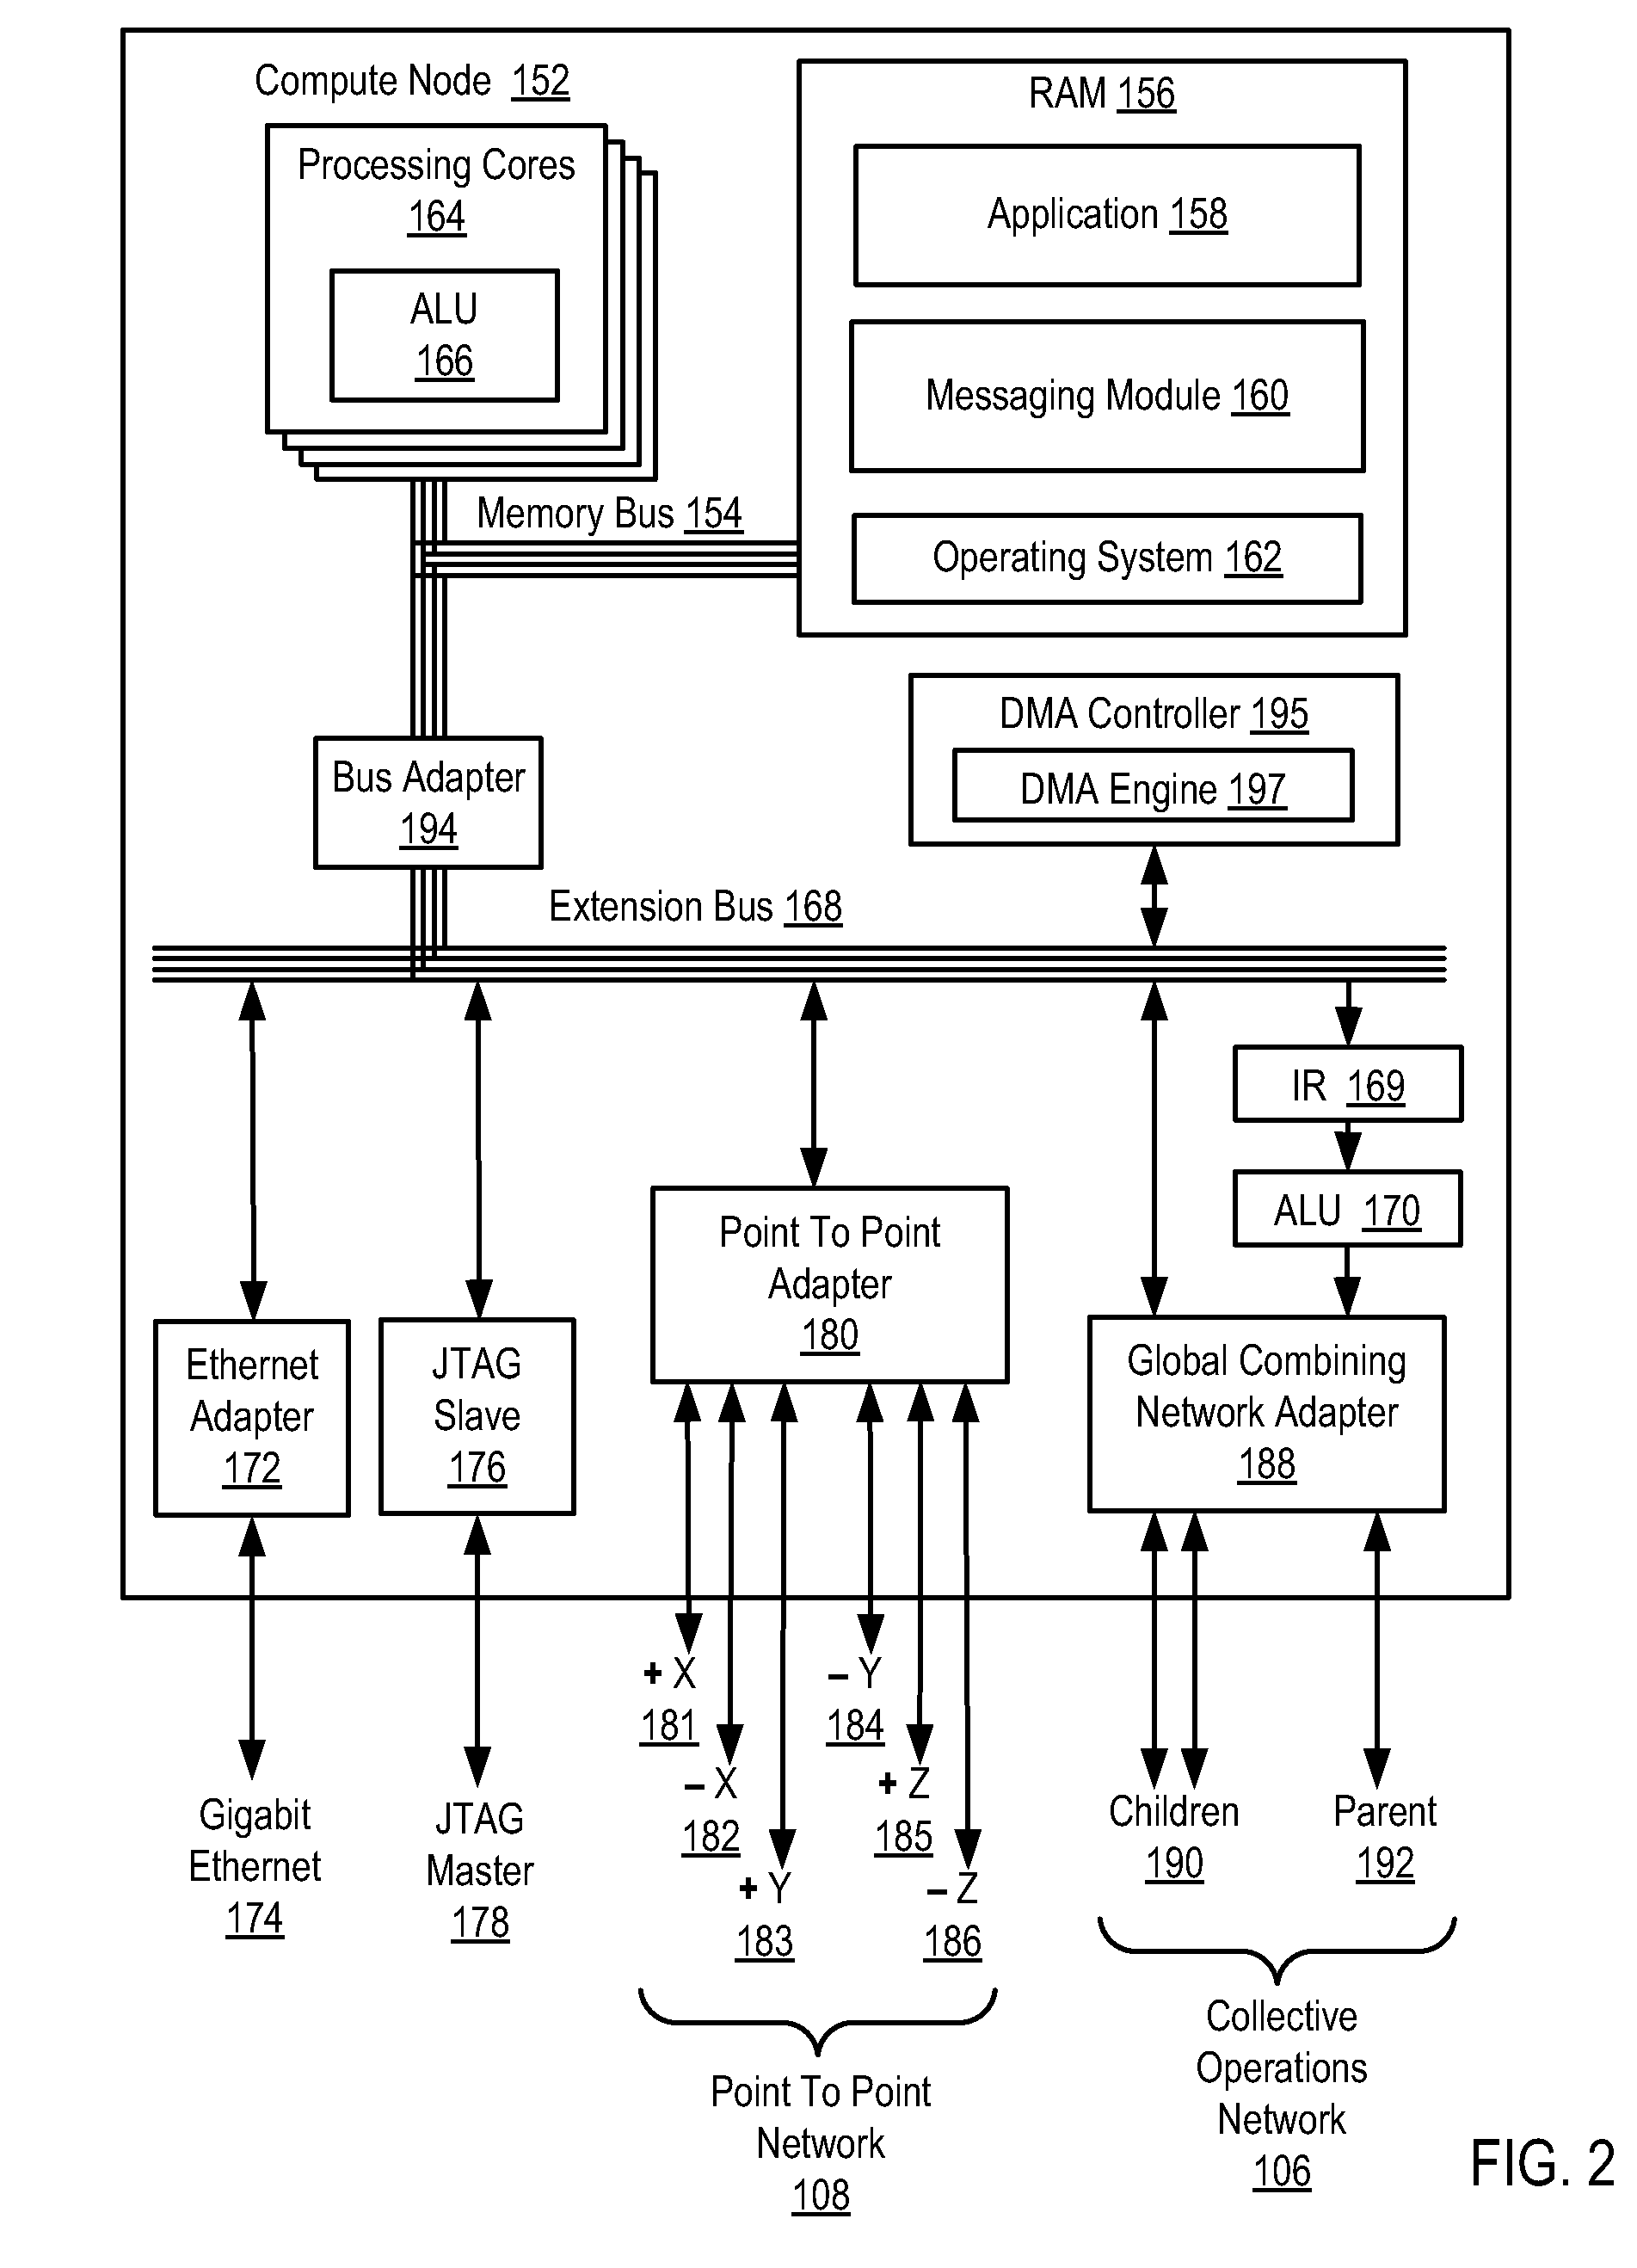 Repeating Direct Memory Access Data Transfer Operations for Compute Nodes in a Parallel Computer